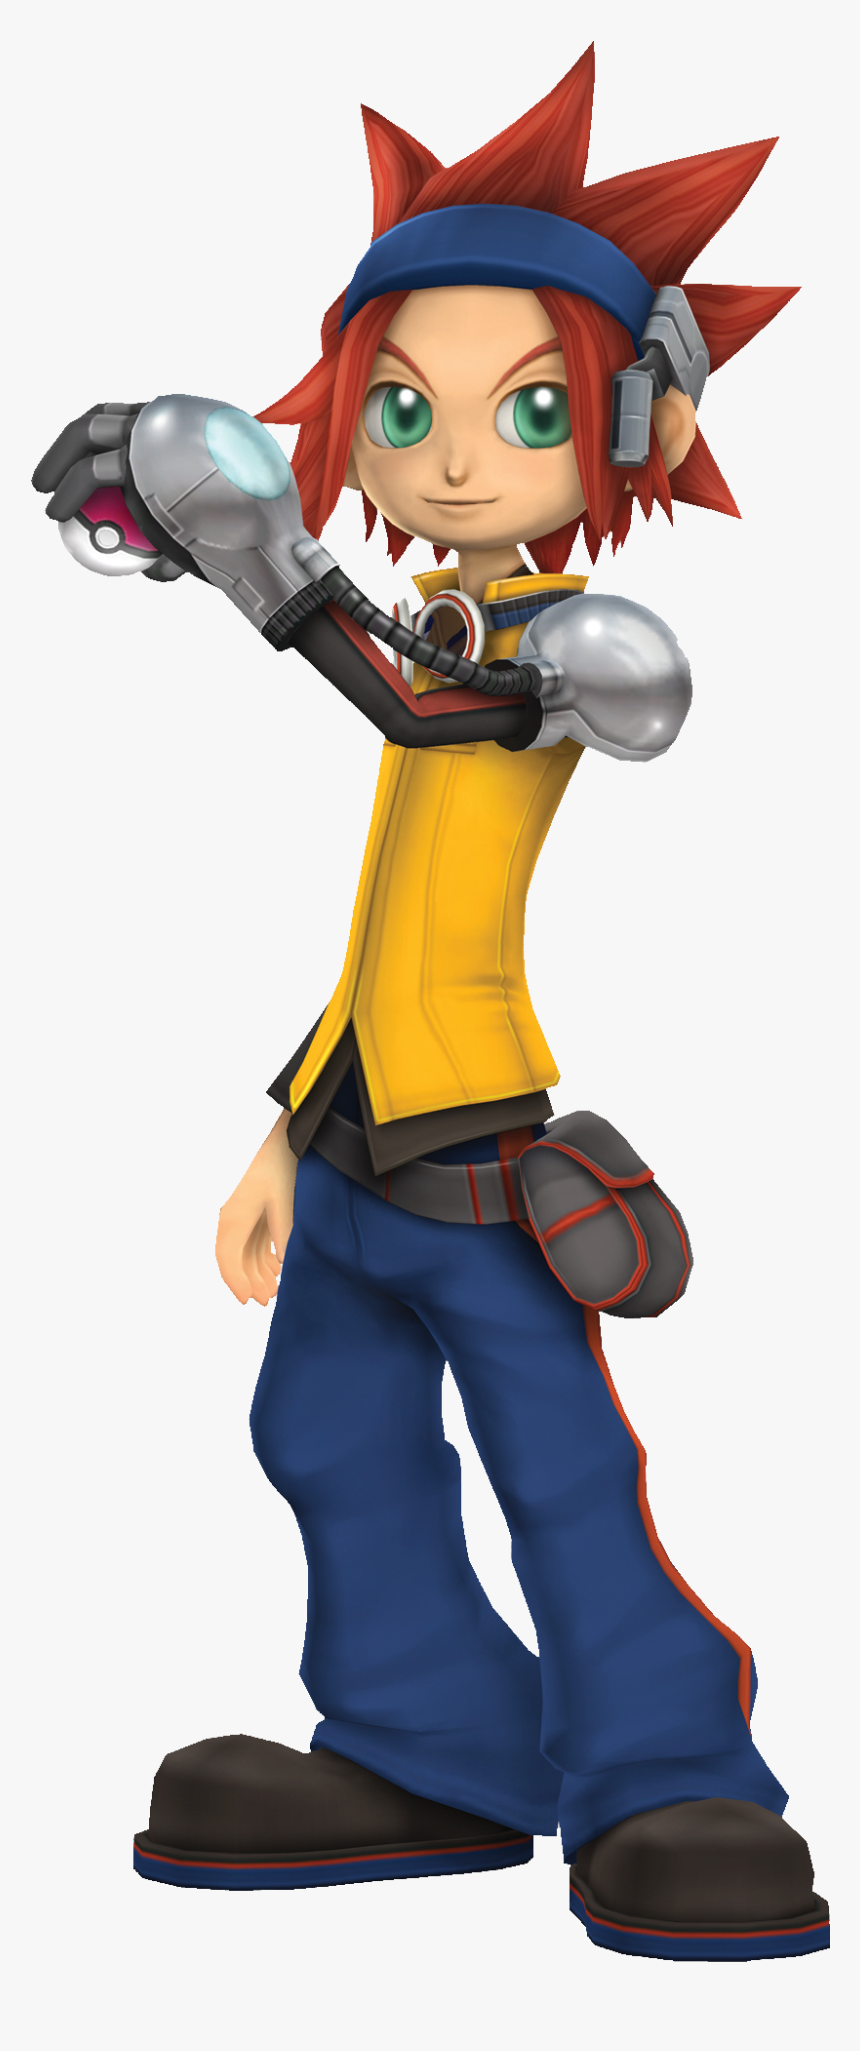 Xd Michael - Pokemon Xd Gale Of Darkness Main Character, HD Png Download, Free Download